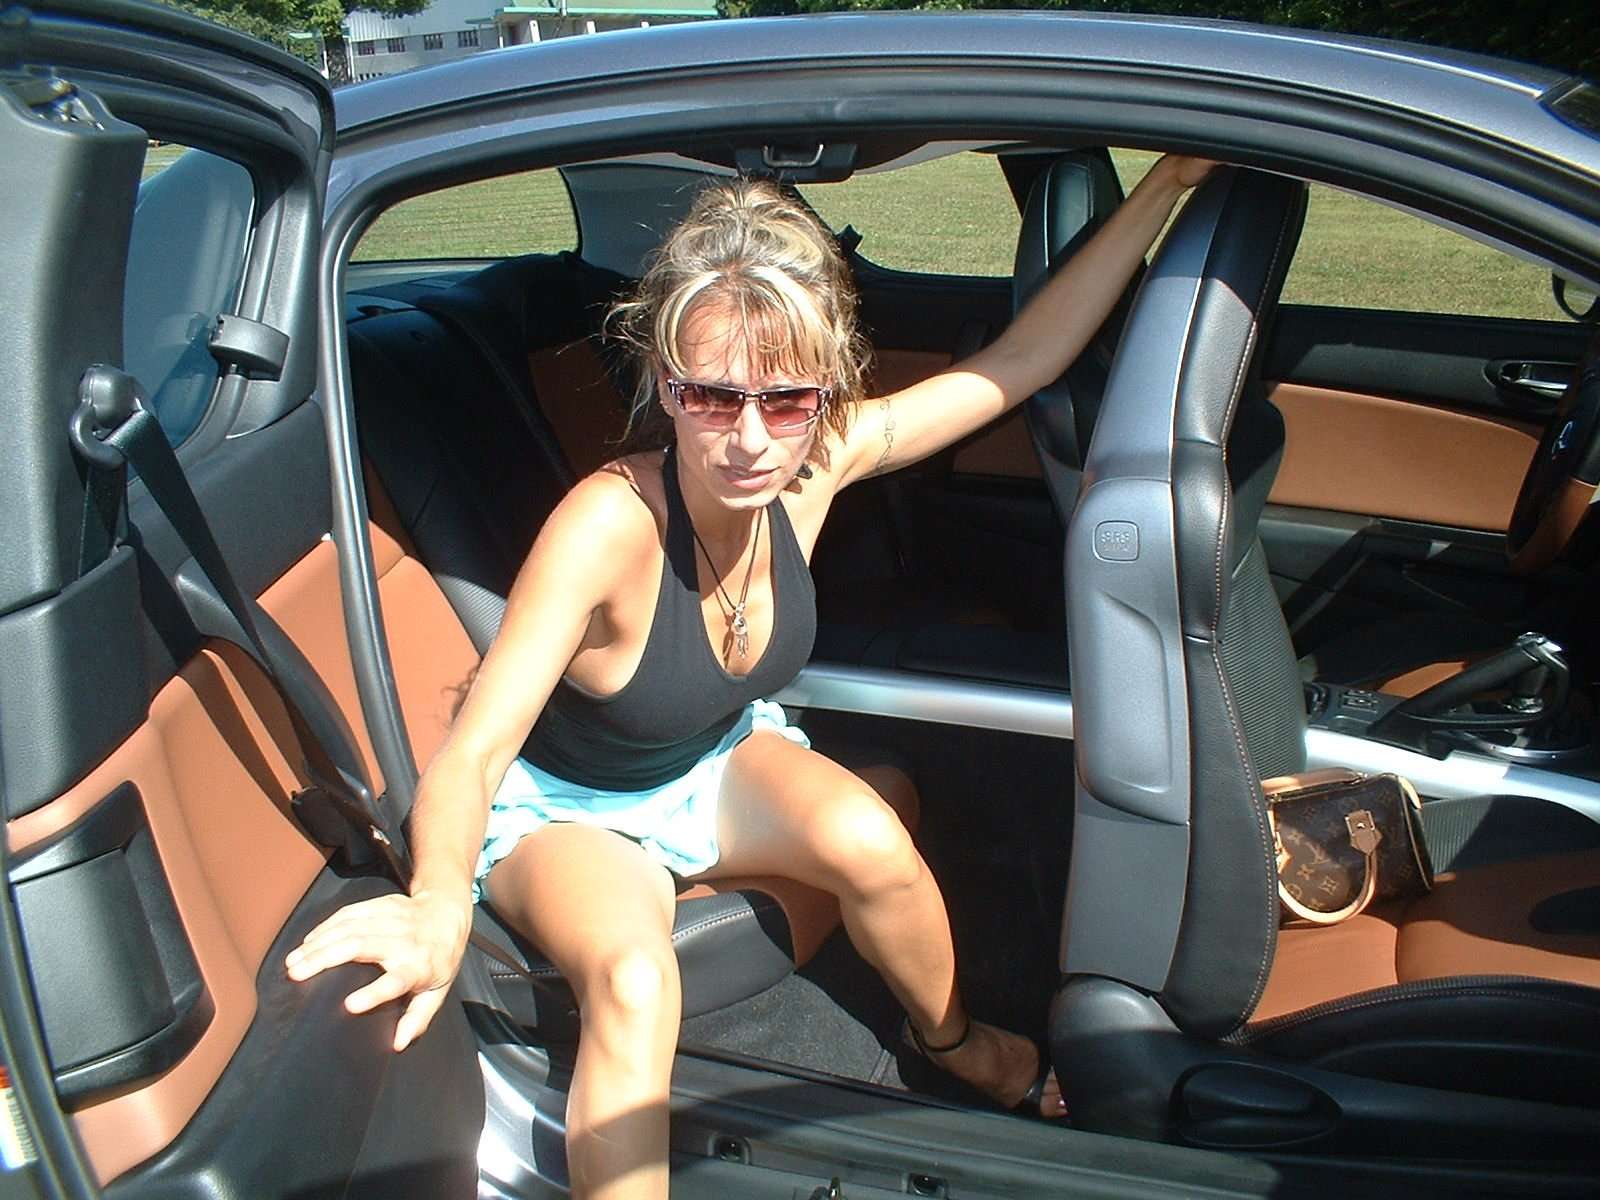 Dirty Wives Exposed MILF With Sports Car Doing Nasty Things 425844